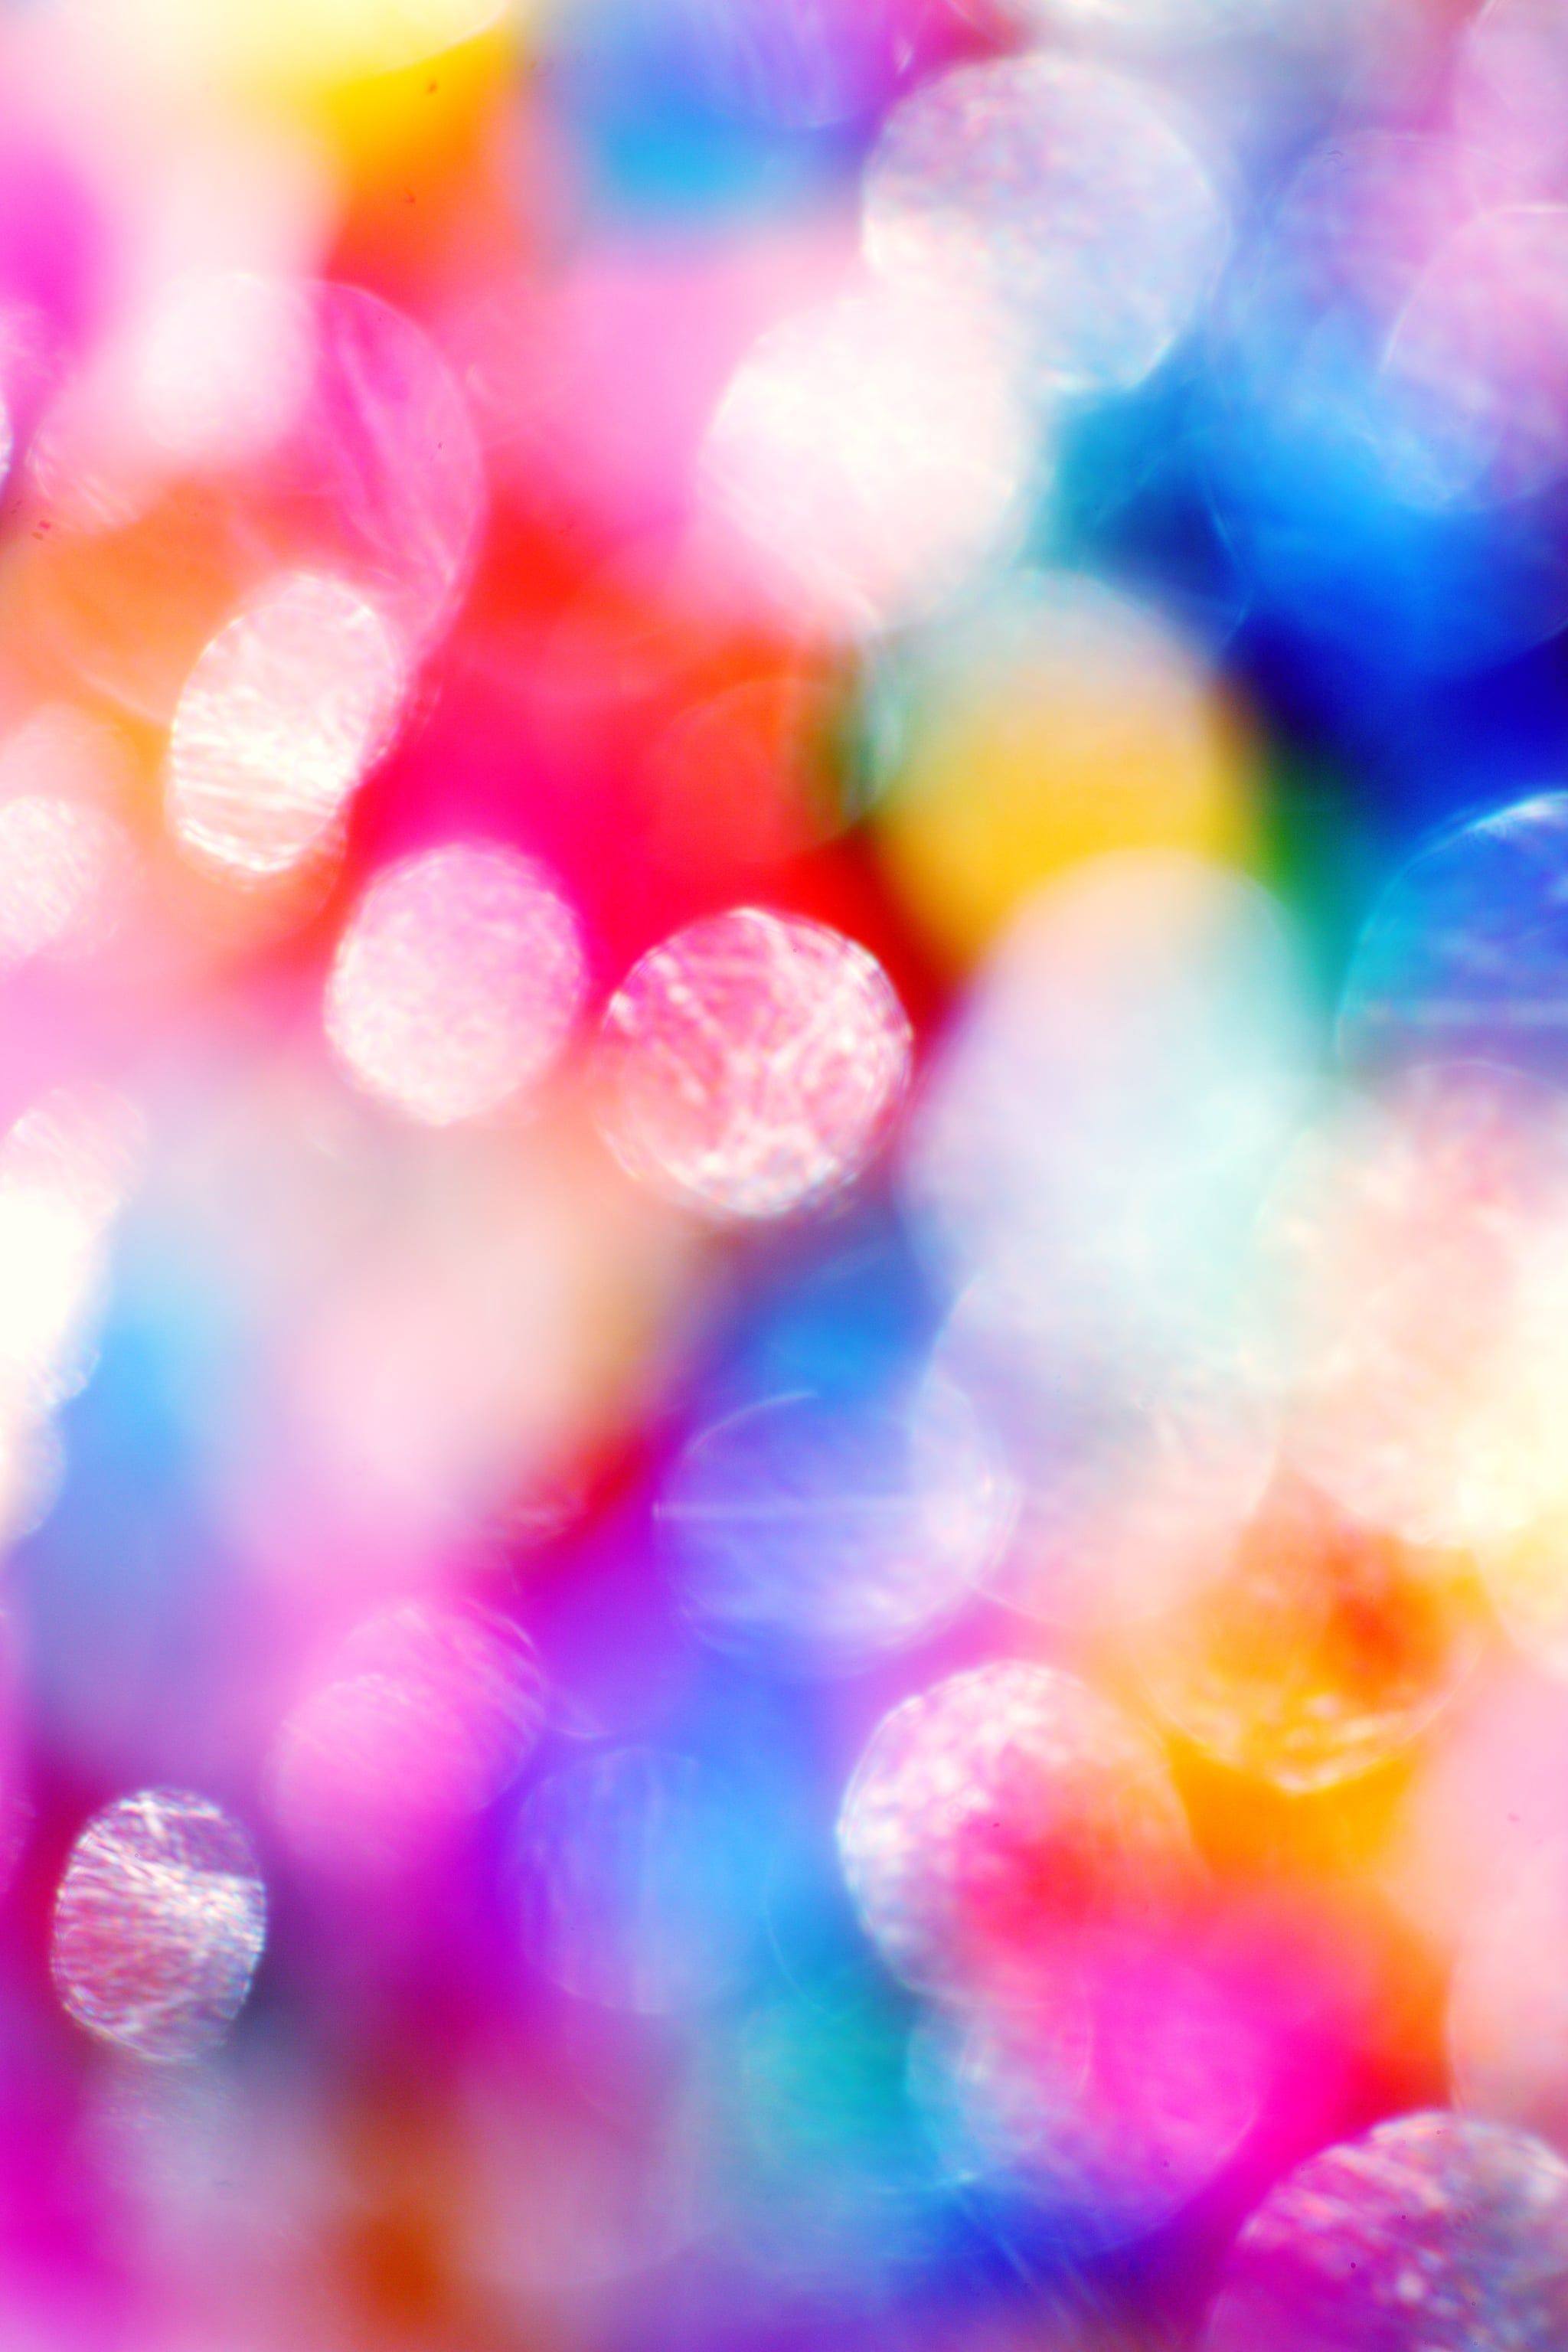 A blurry image of colorful circles - Glitter